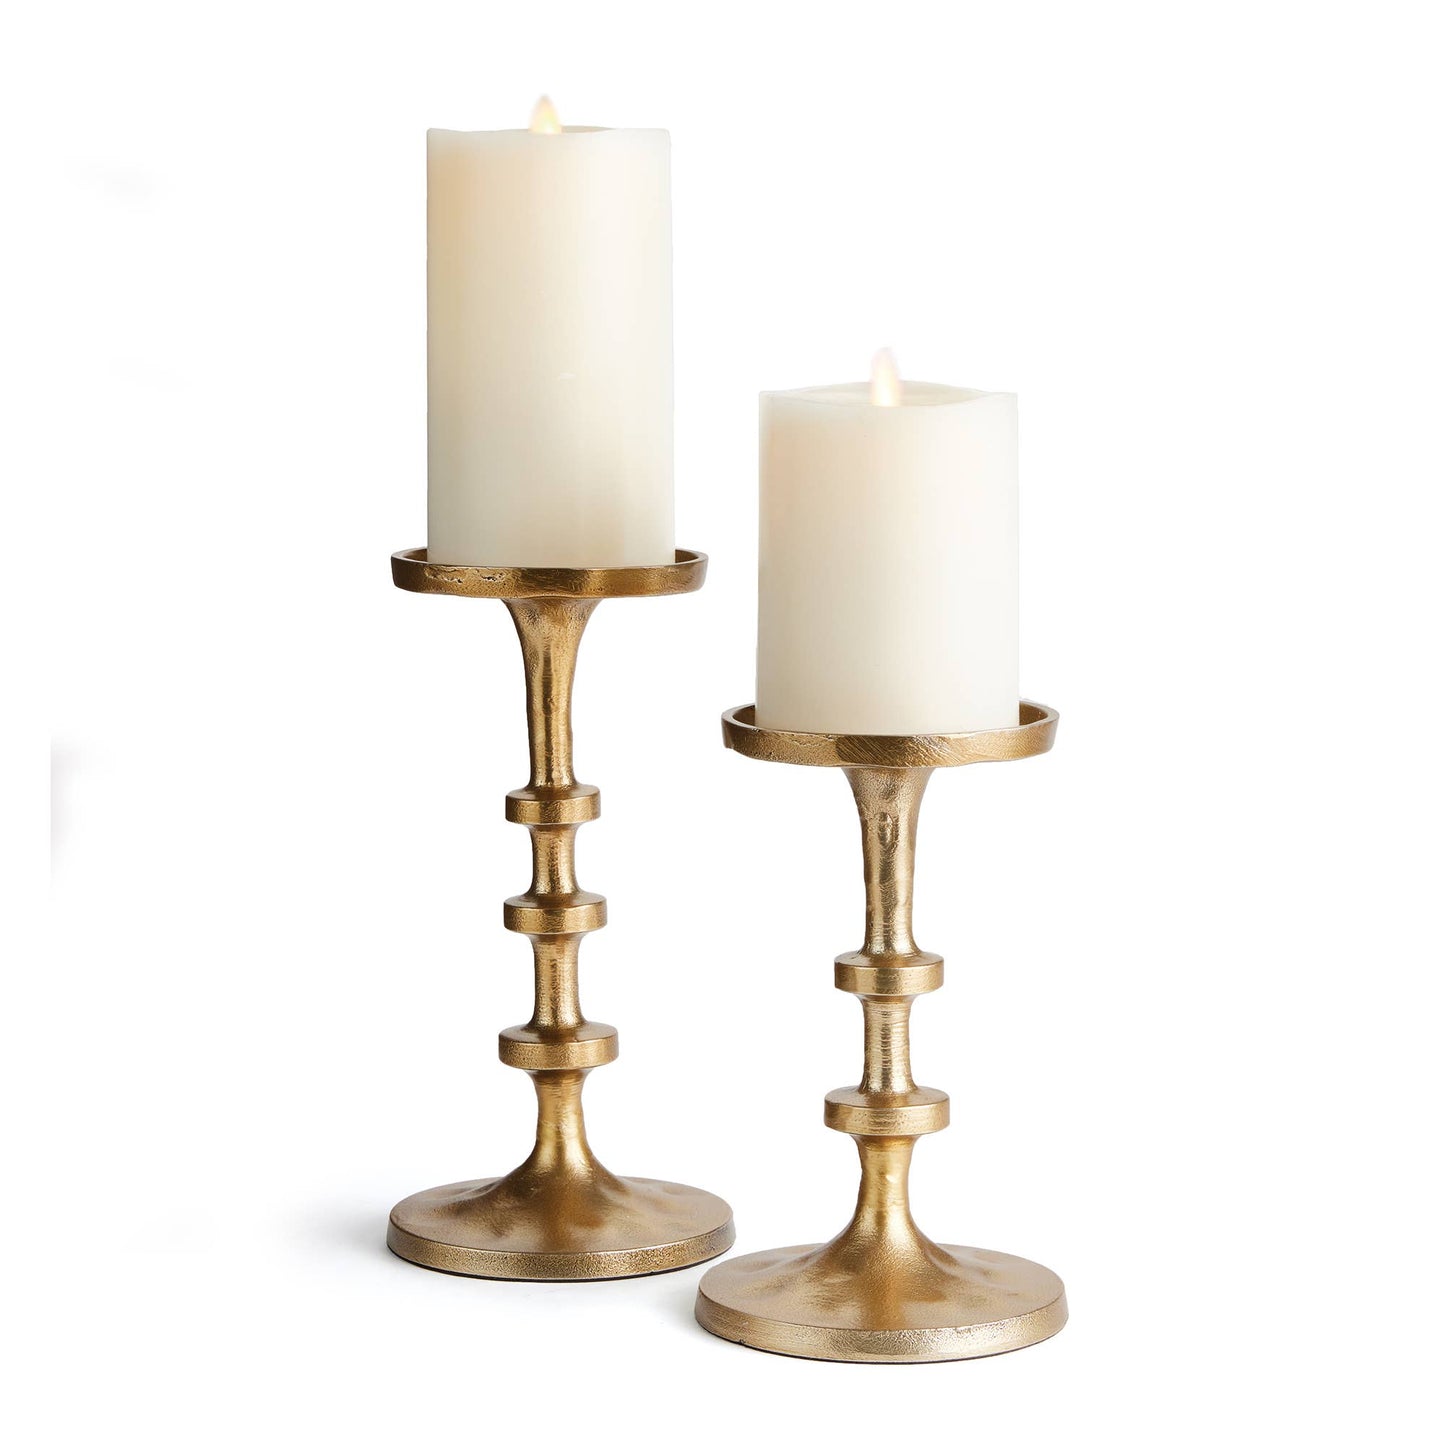 ABACUS PETITE CANDLE STANDS, SET OF 2 BRASS